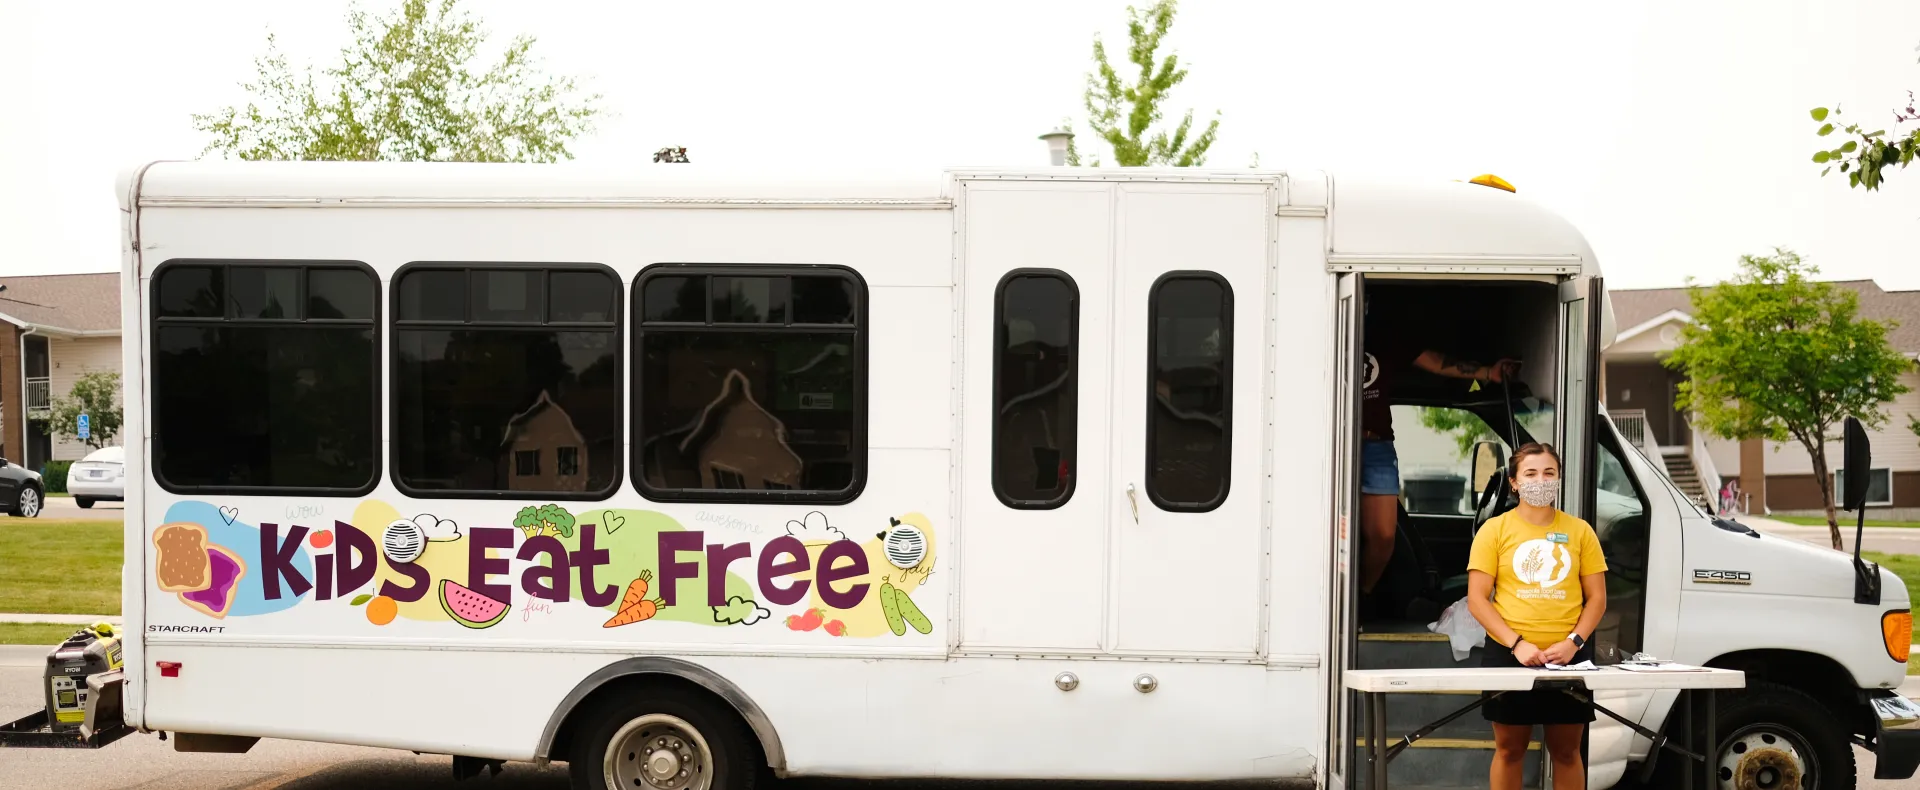 White truck with text kids eat for free